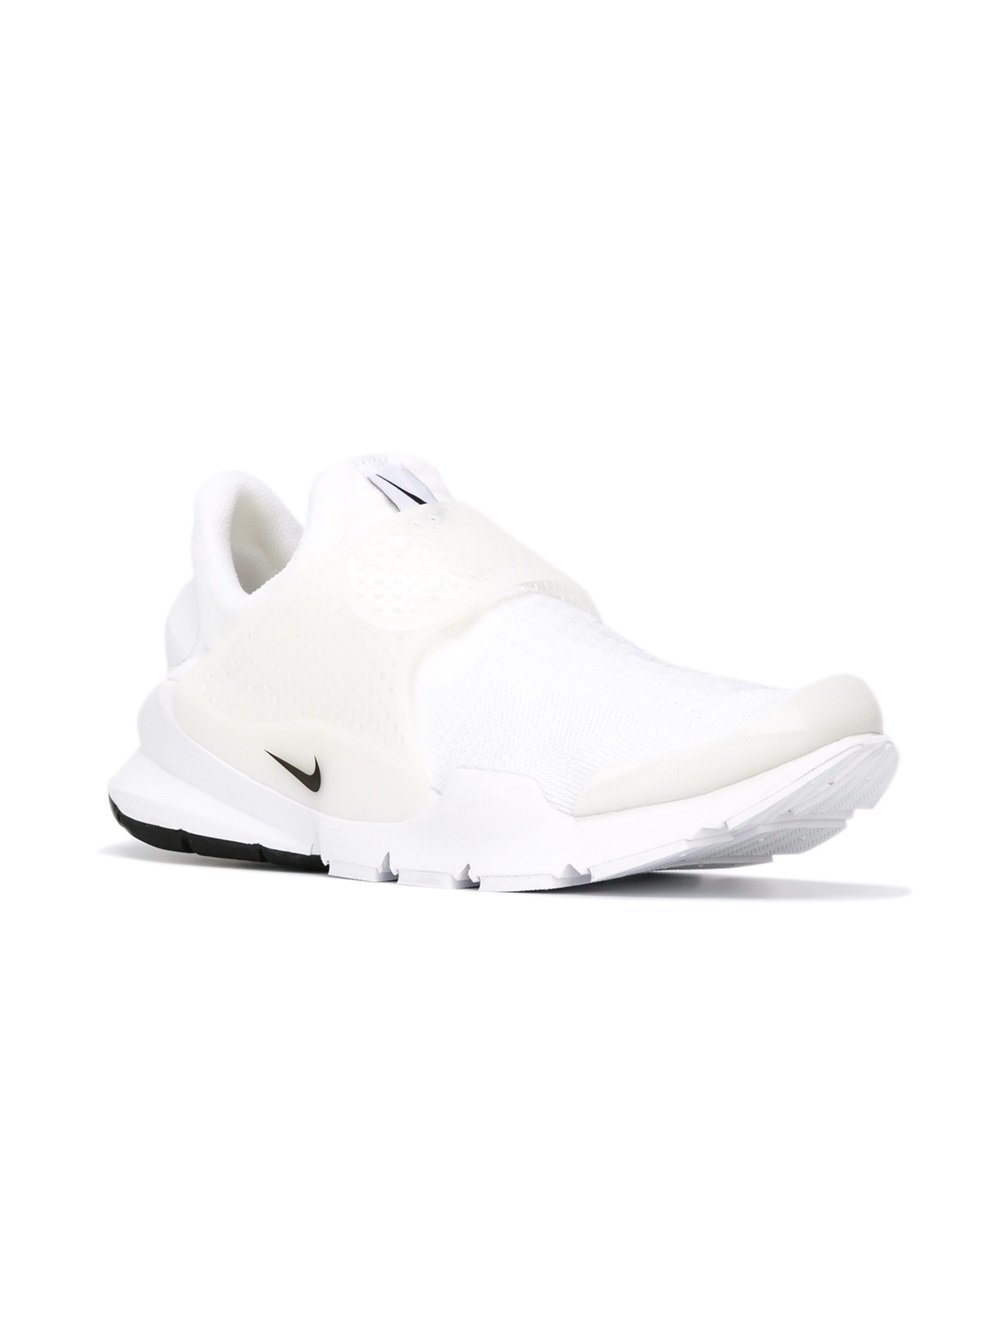 Decaer arena Polvoriento Nike Socfly Independence Day Sneakers, $175 | farfetch.com | Lookastic